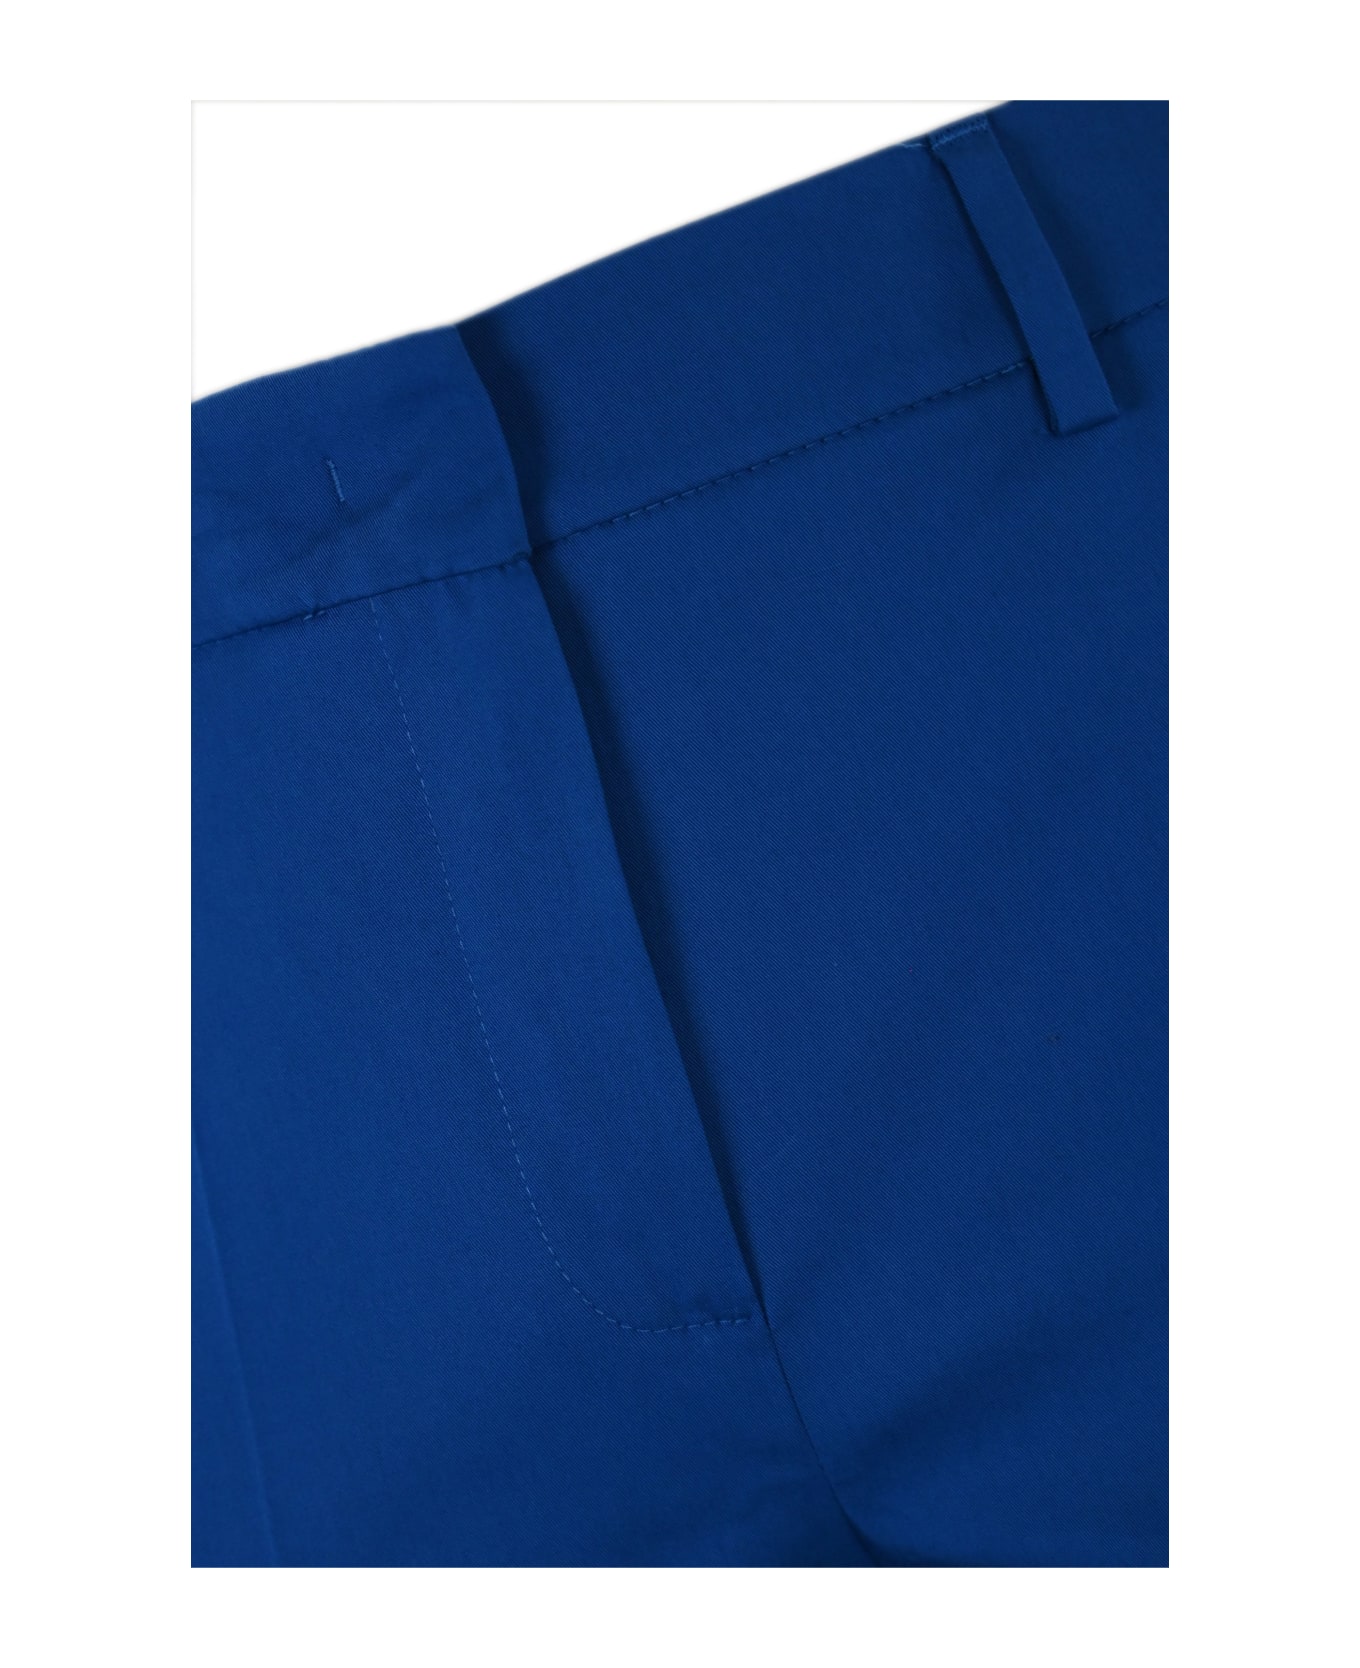 Weekend Max Mara "cecco" Stretch Cotton Trousers - Oltremare